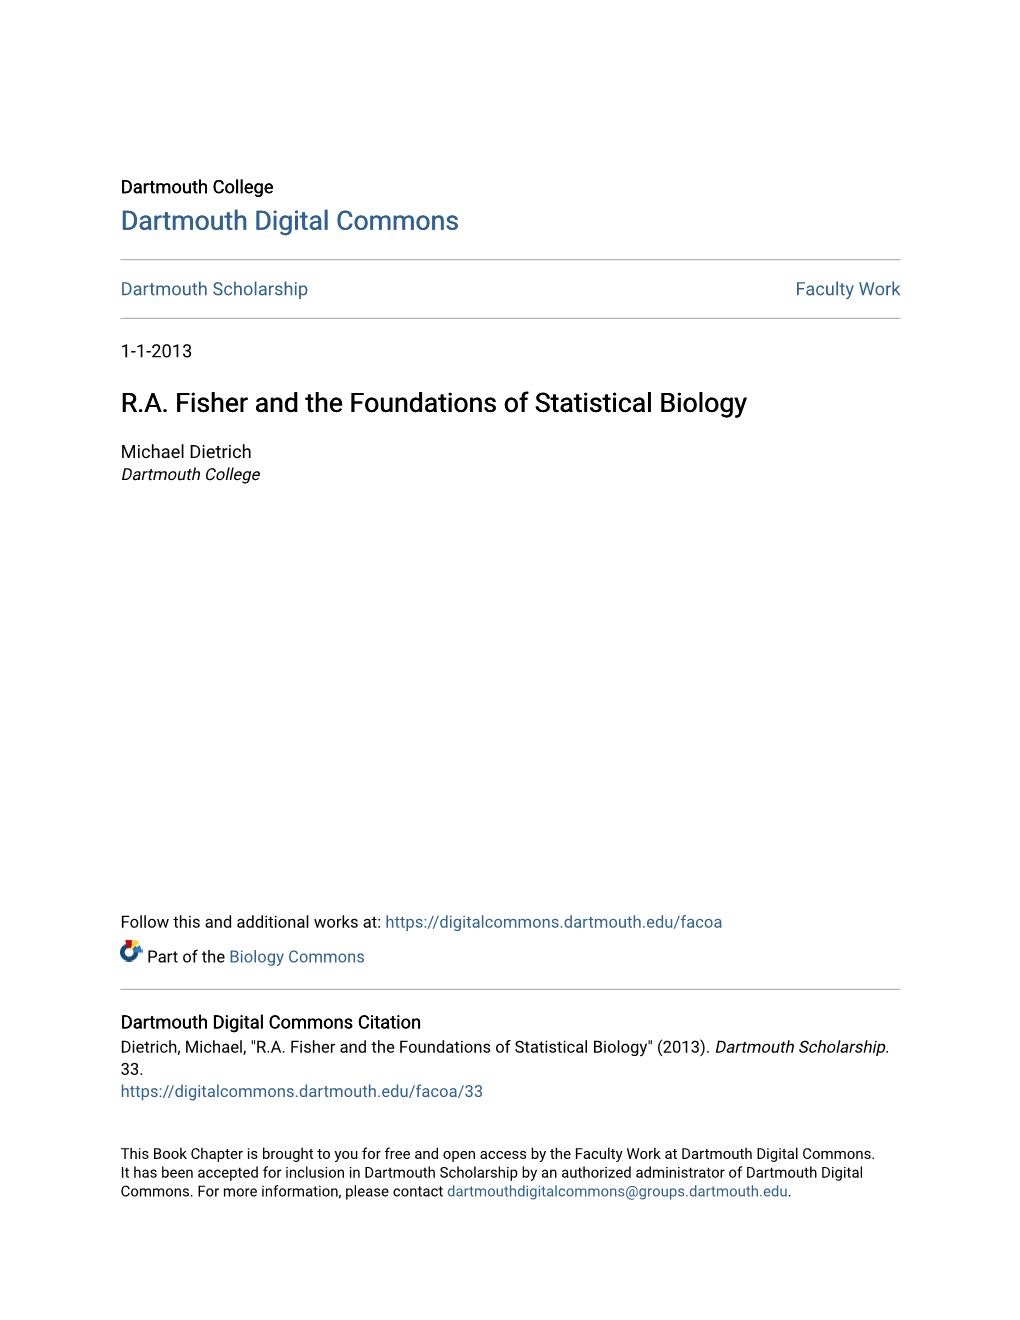 R.A. Fisher and the Foundations of Statistical Biology